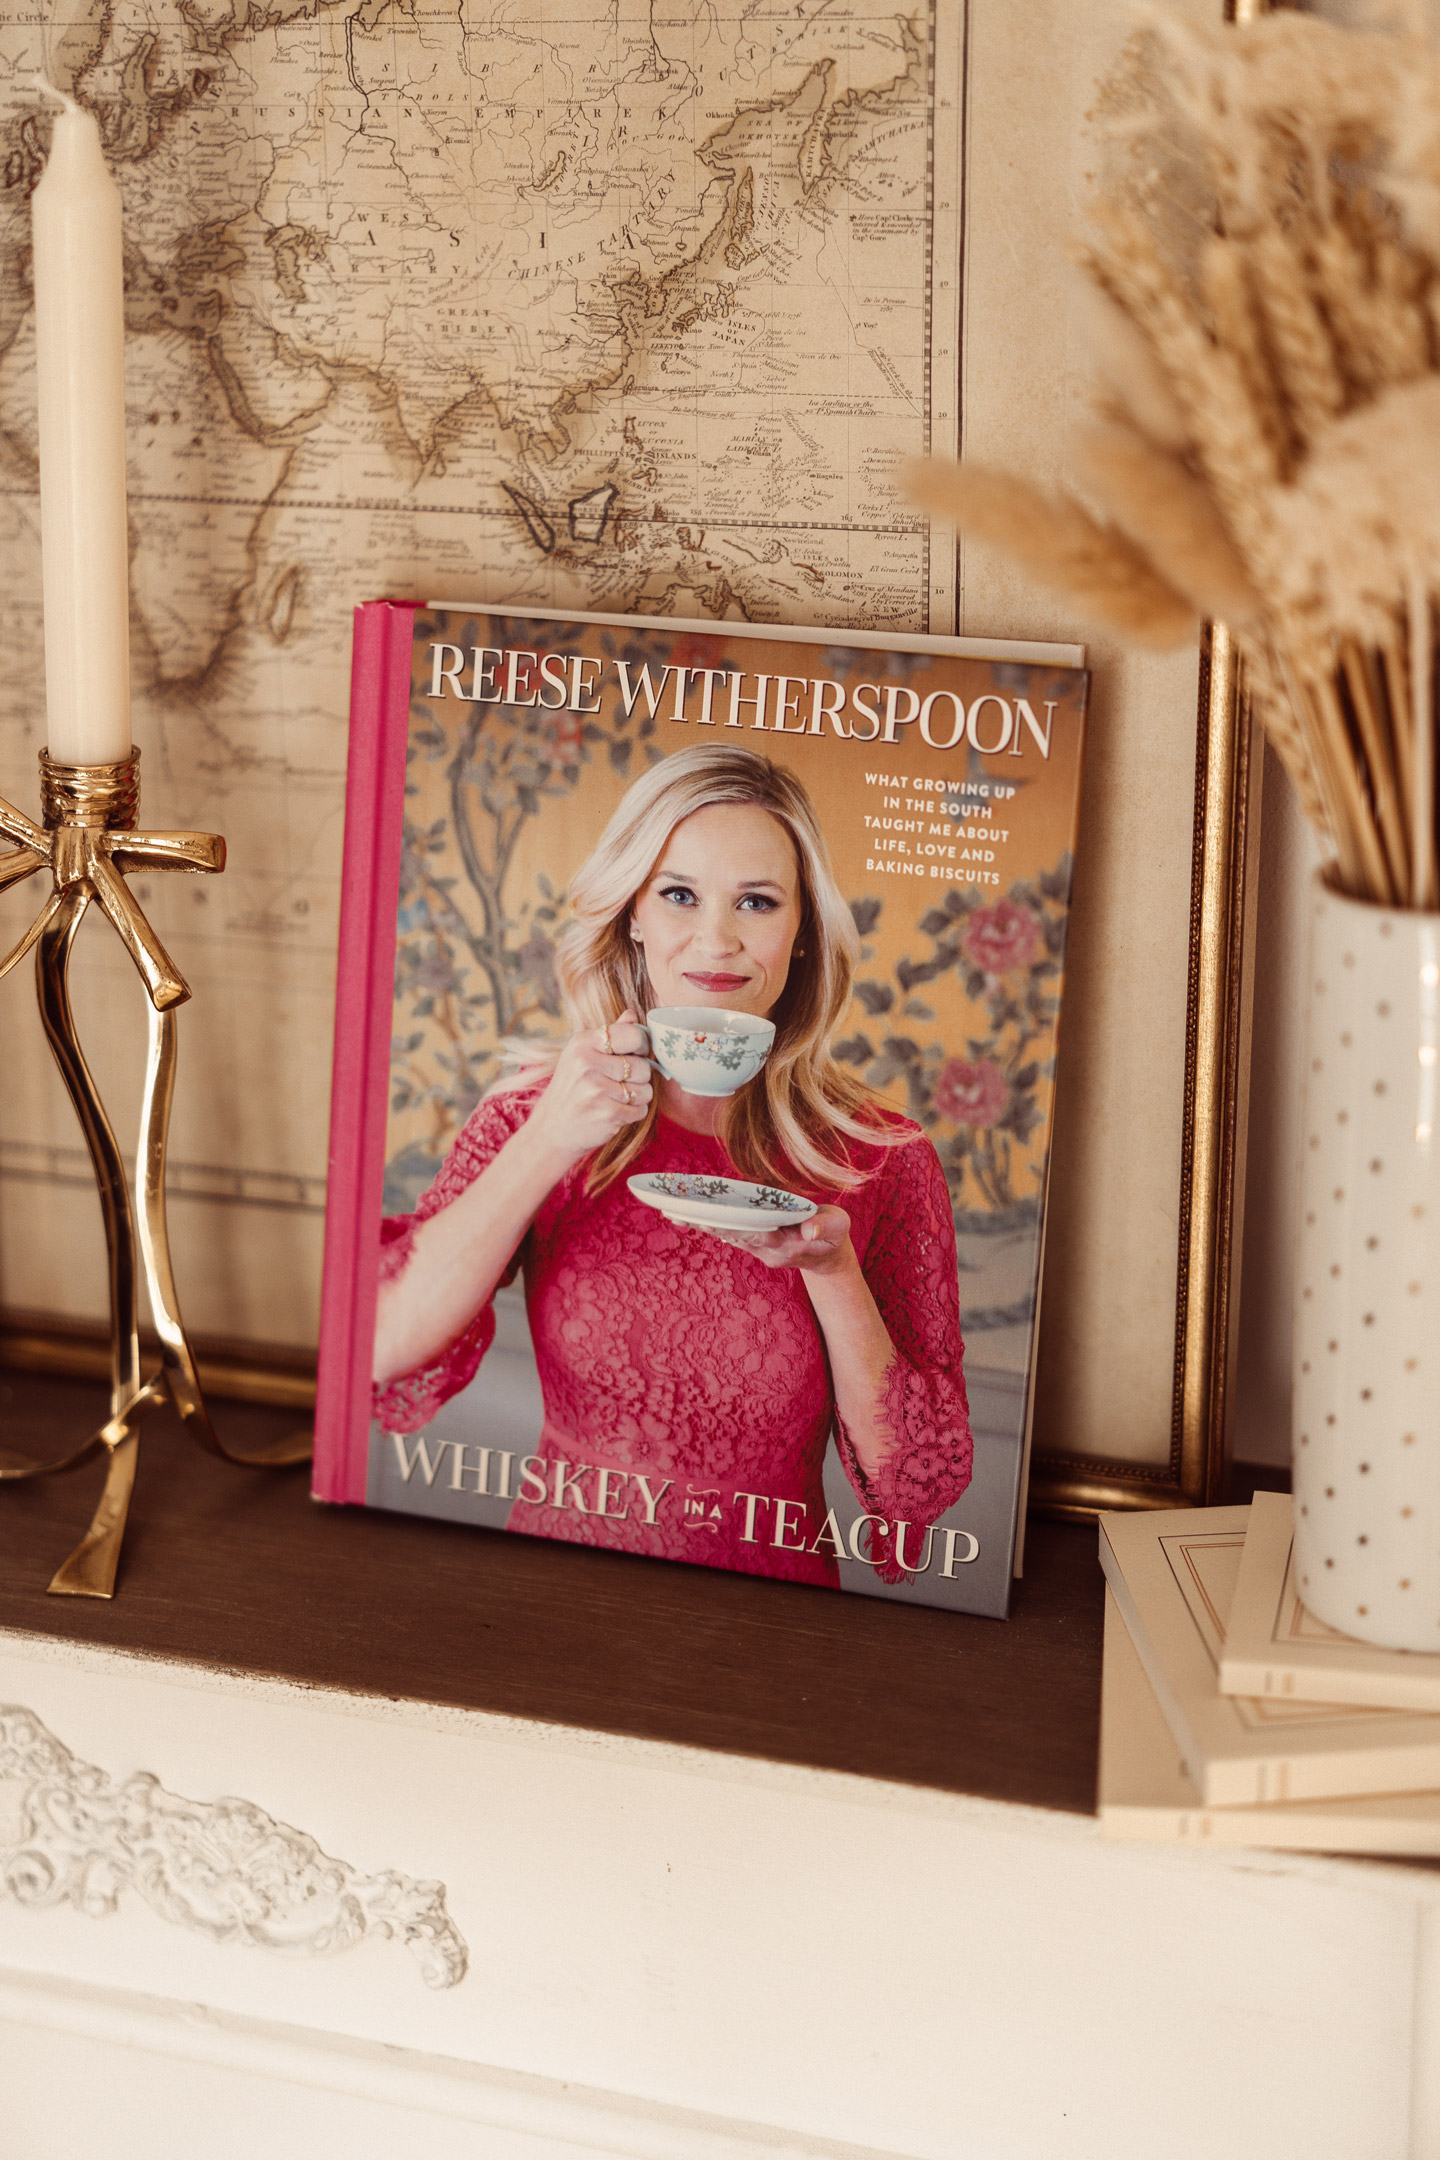 Reese-Witherspoon-book-whiskey-in-a-teacup